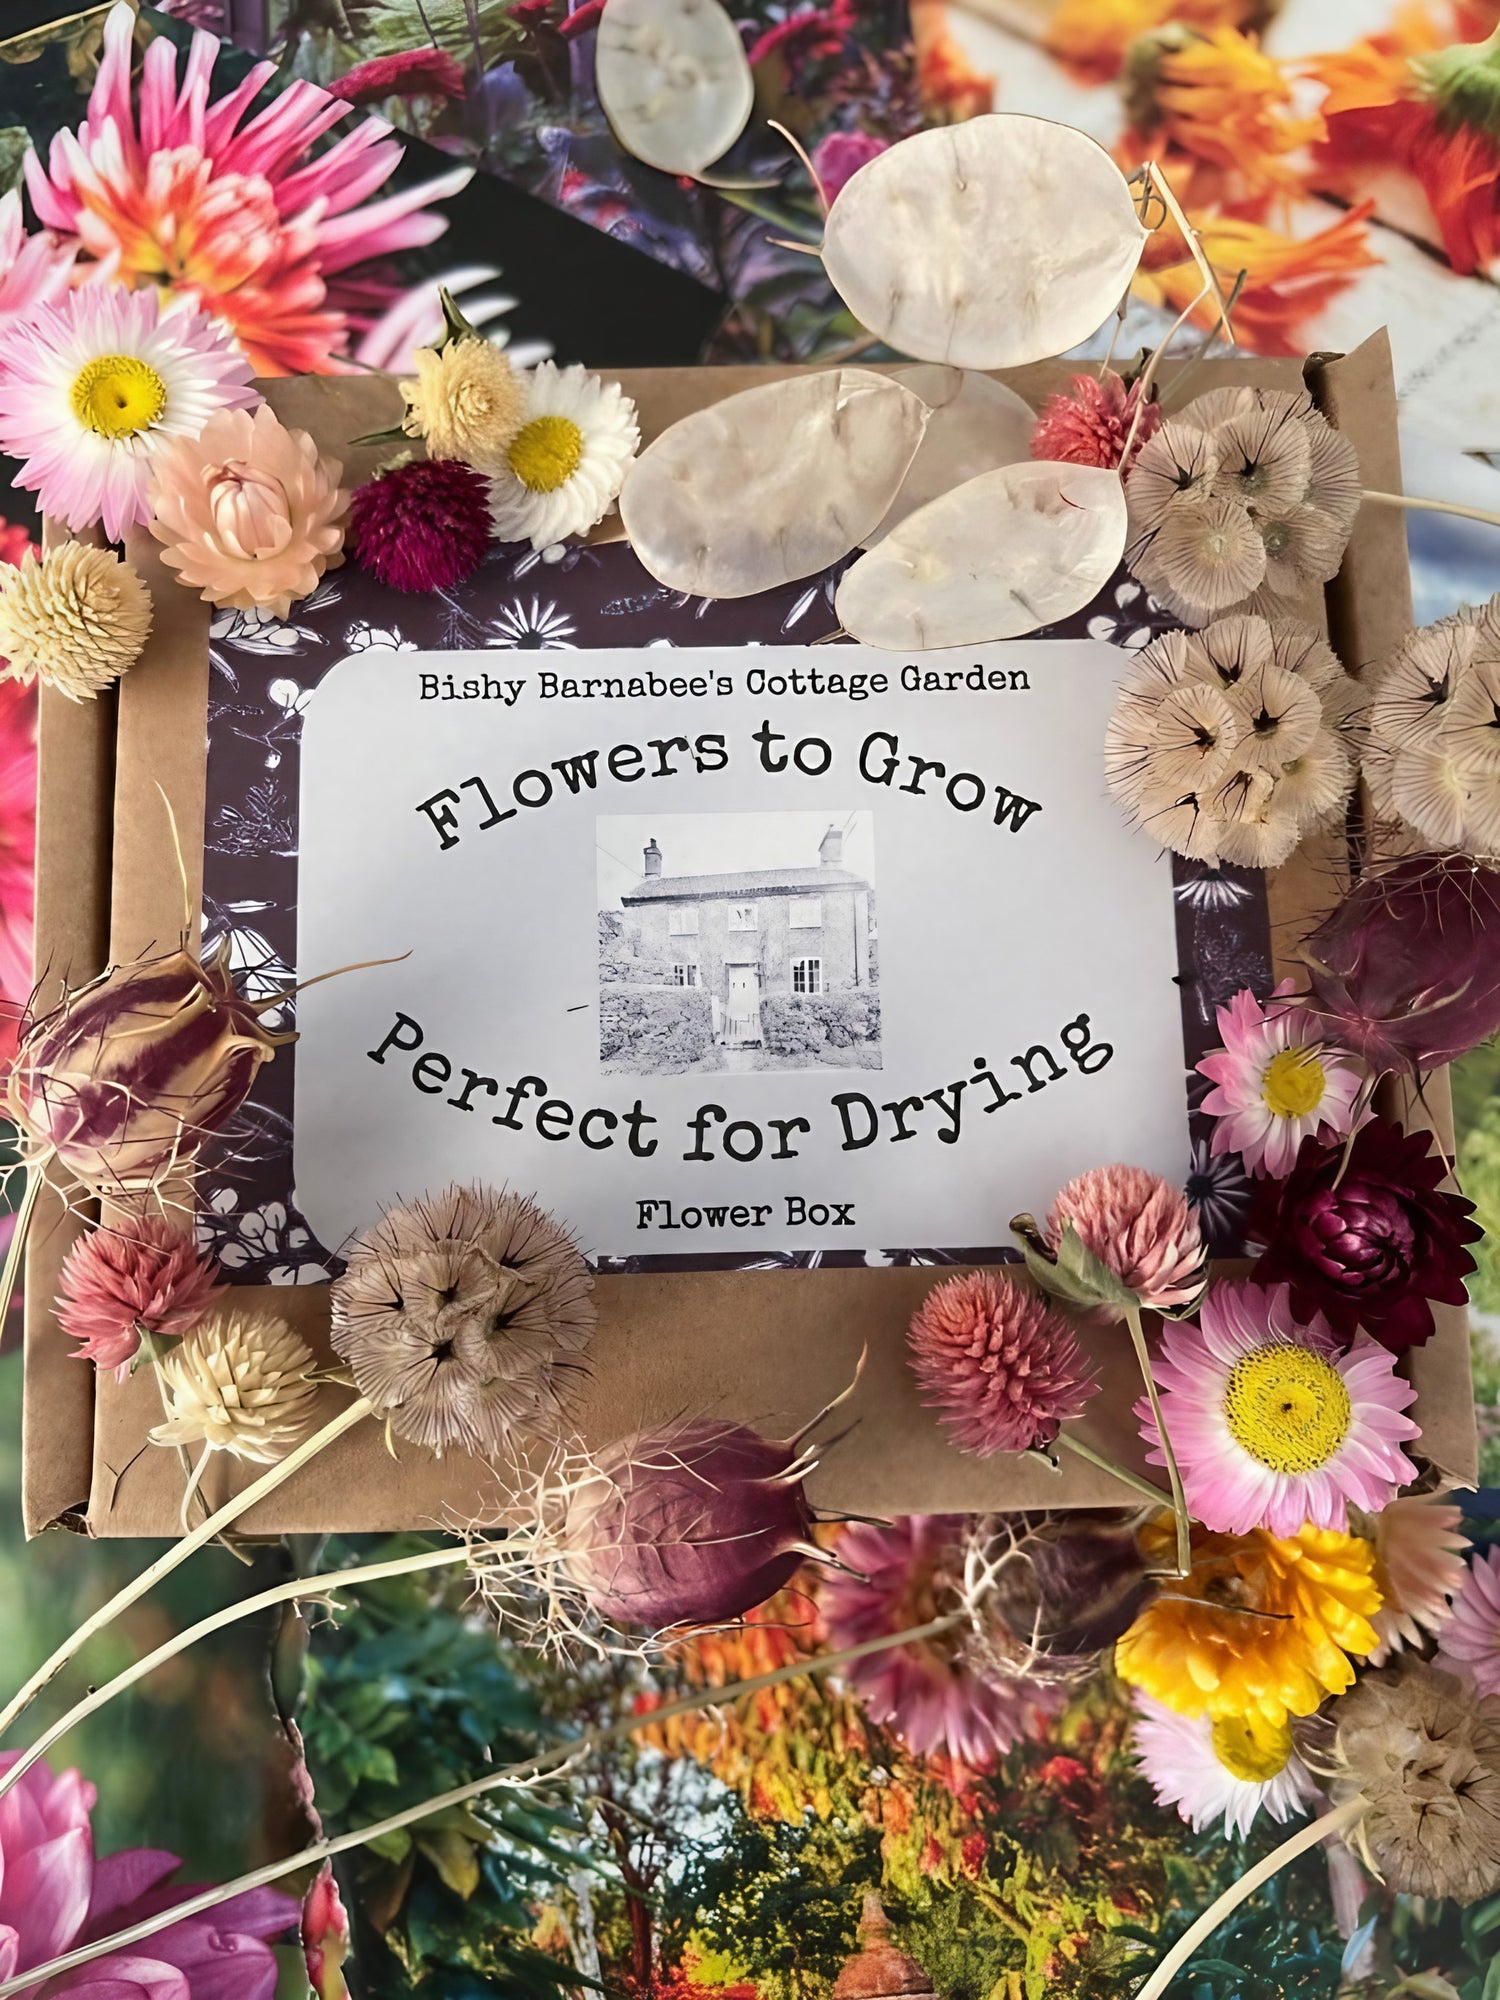 Instructional packaging for growing flowers suitable for drying